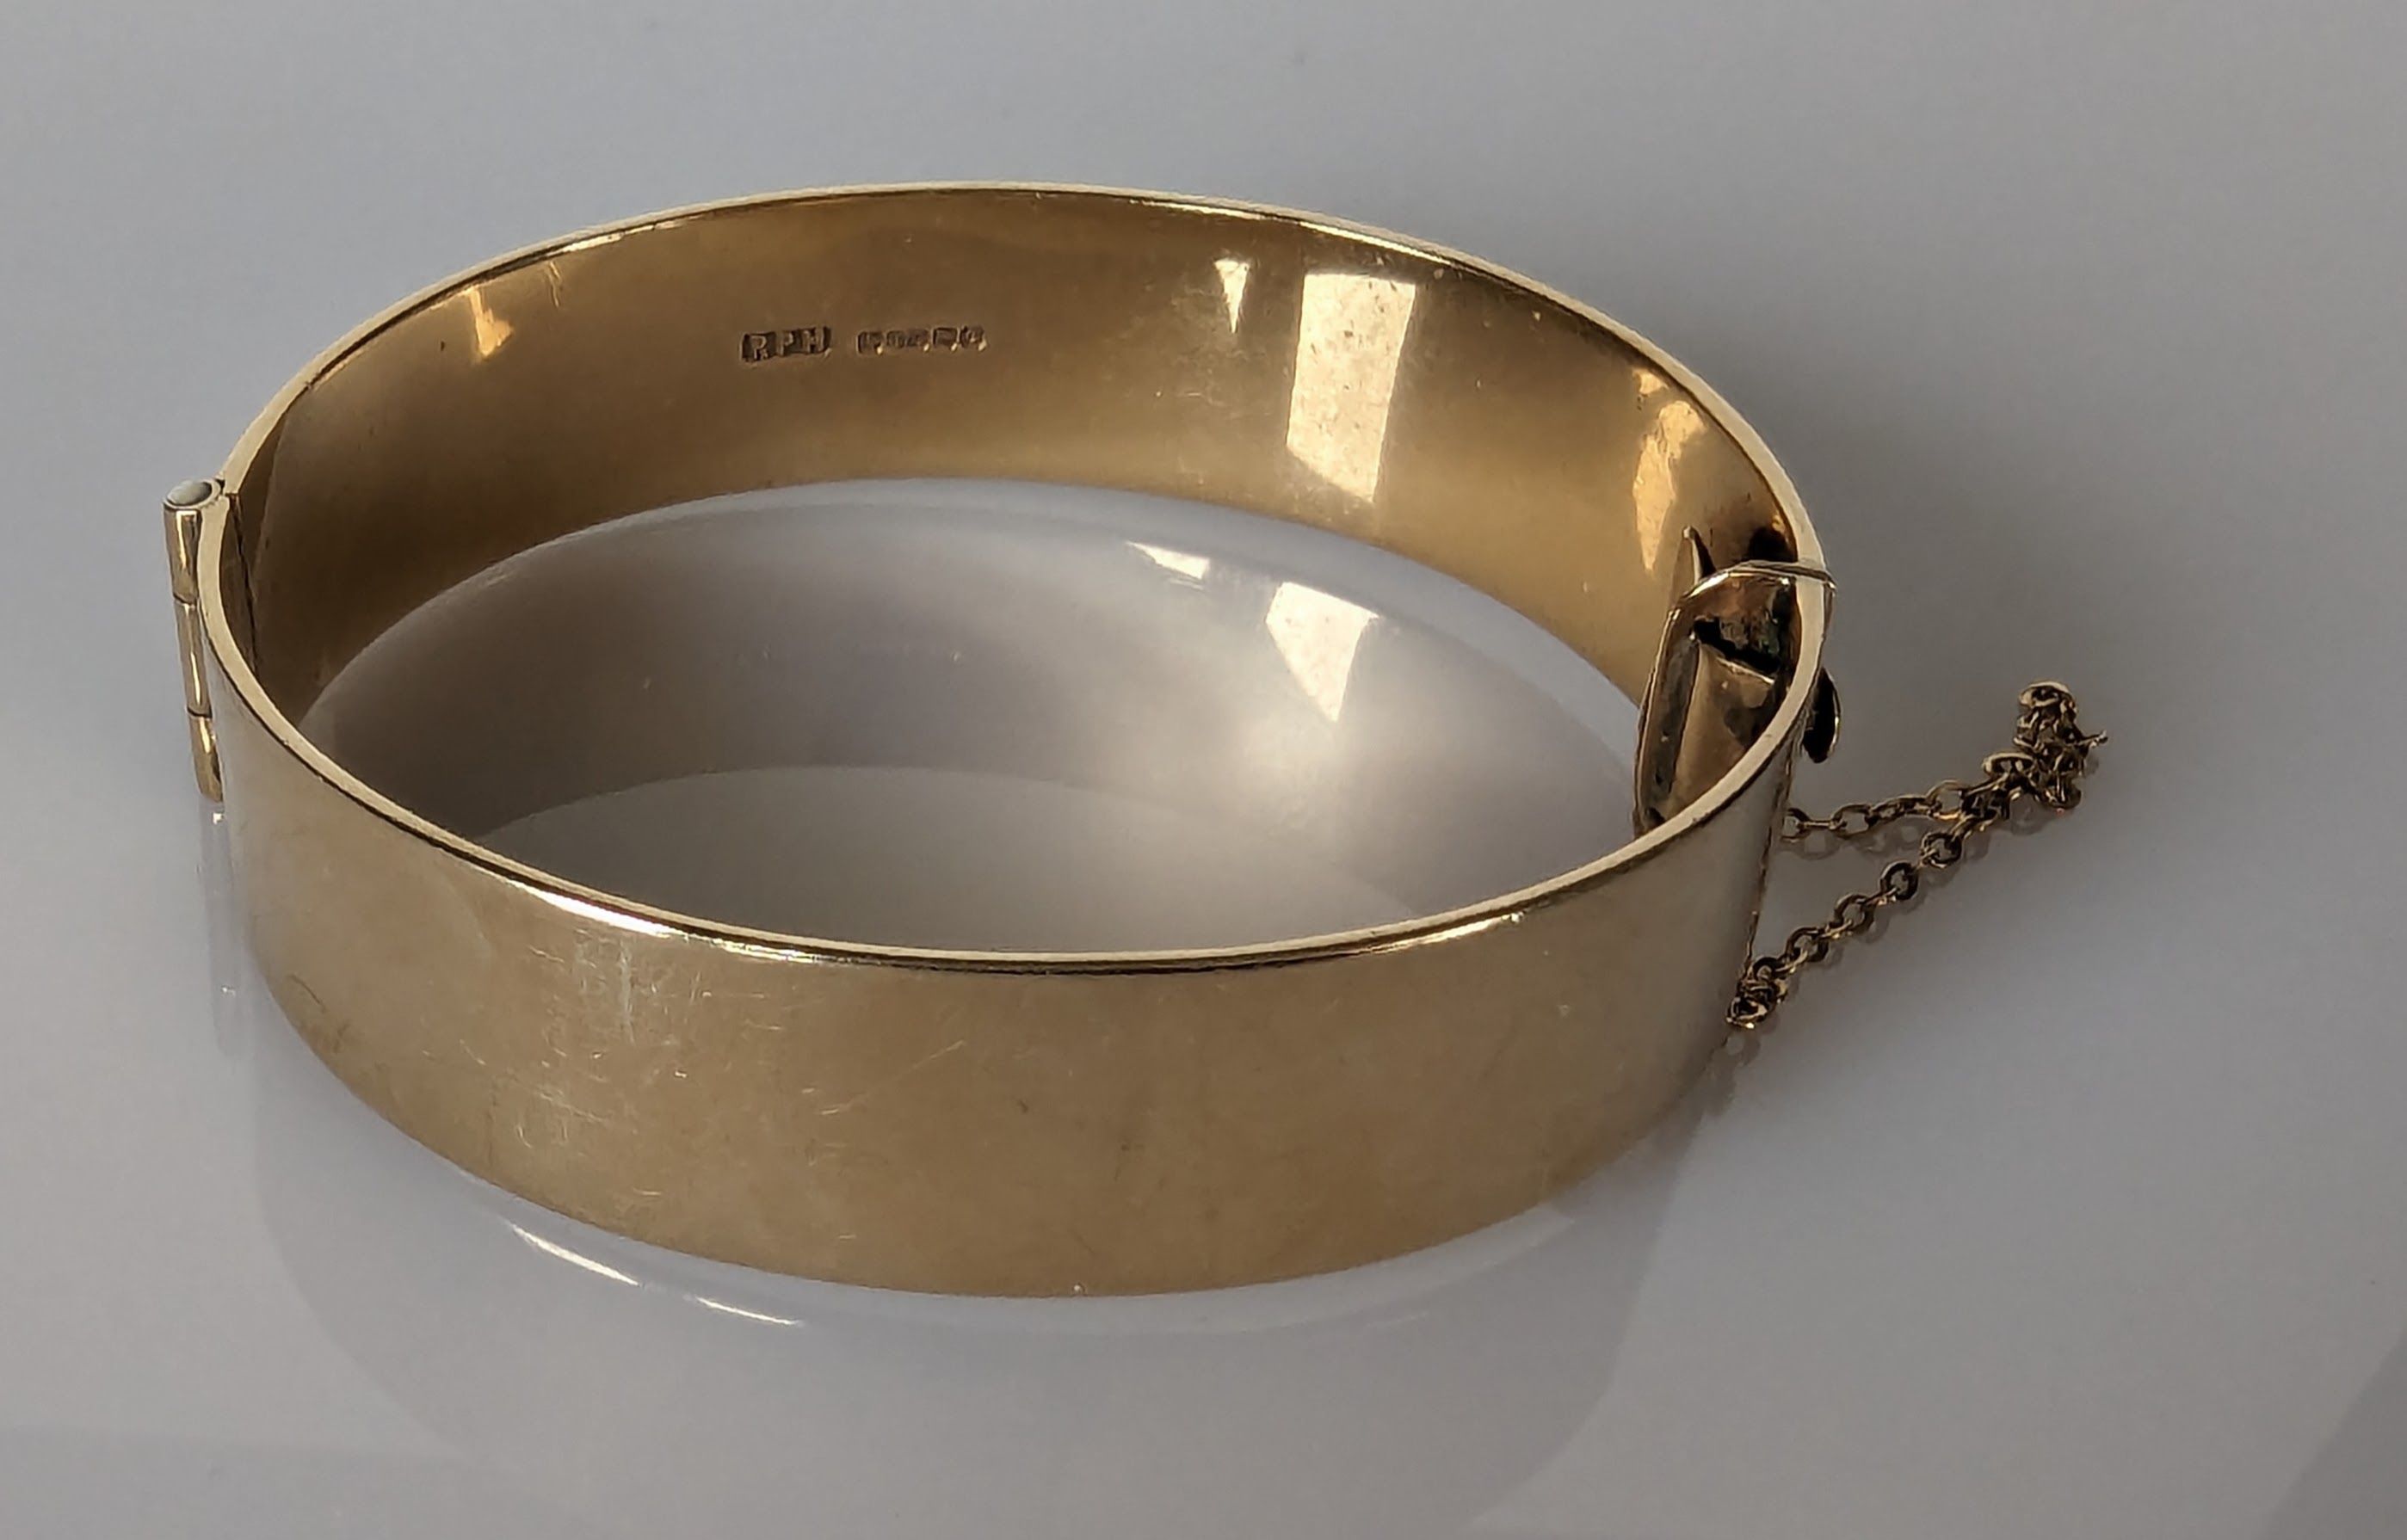 An etched 9ct gold bangle, 60mm, hallmarked for R P H Jewellery Co Ltd, Birmingham, 44g - Image 2 of 2